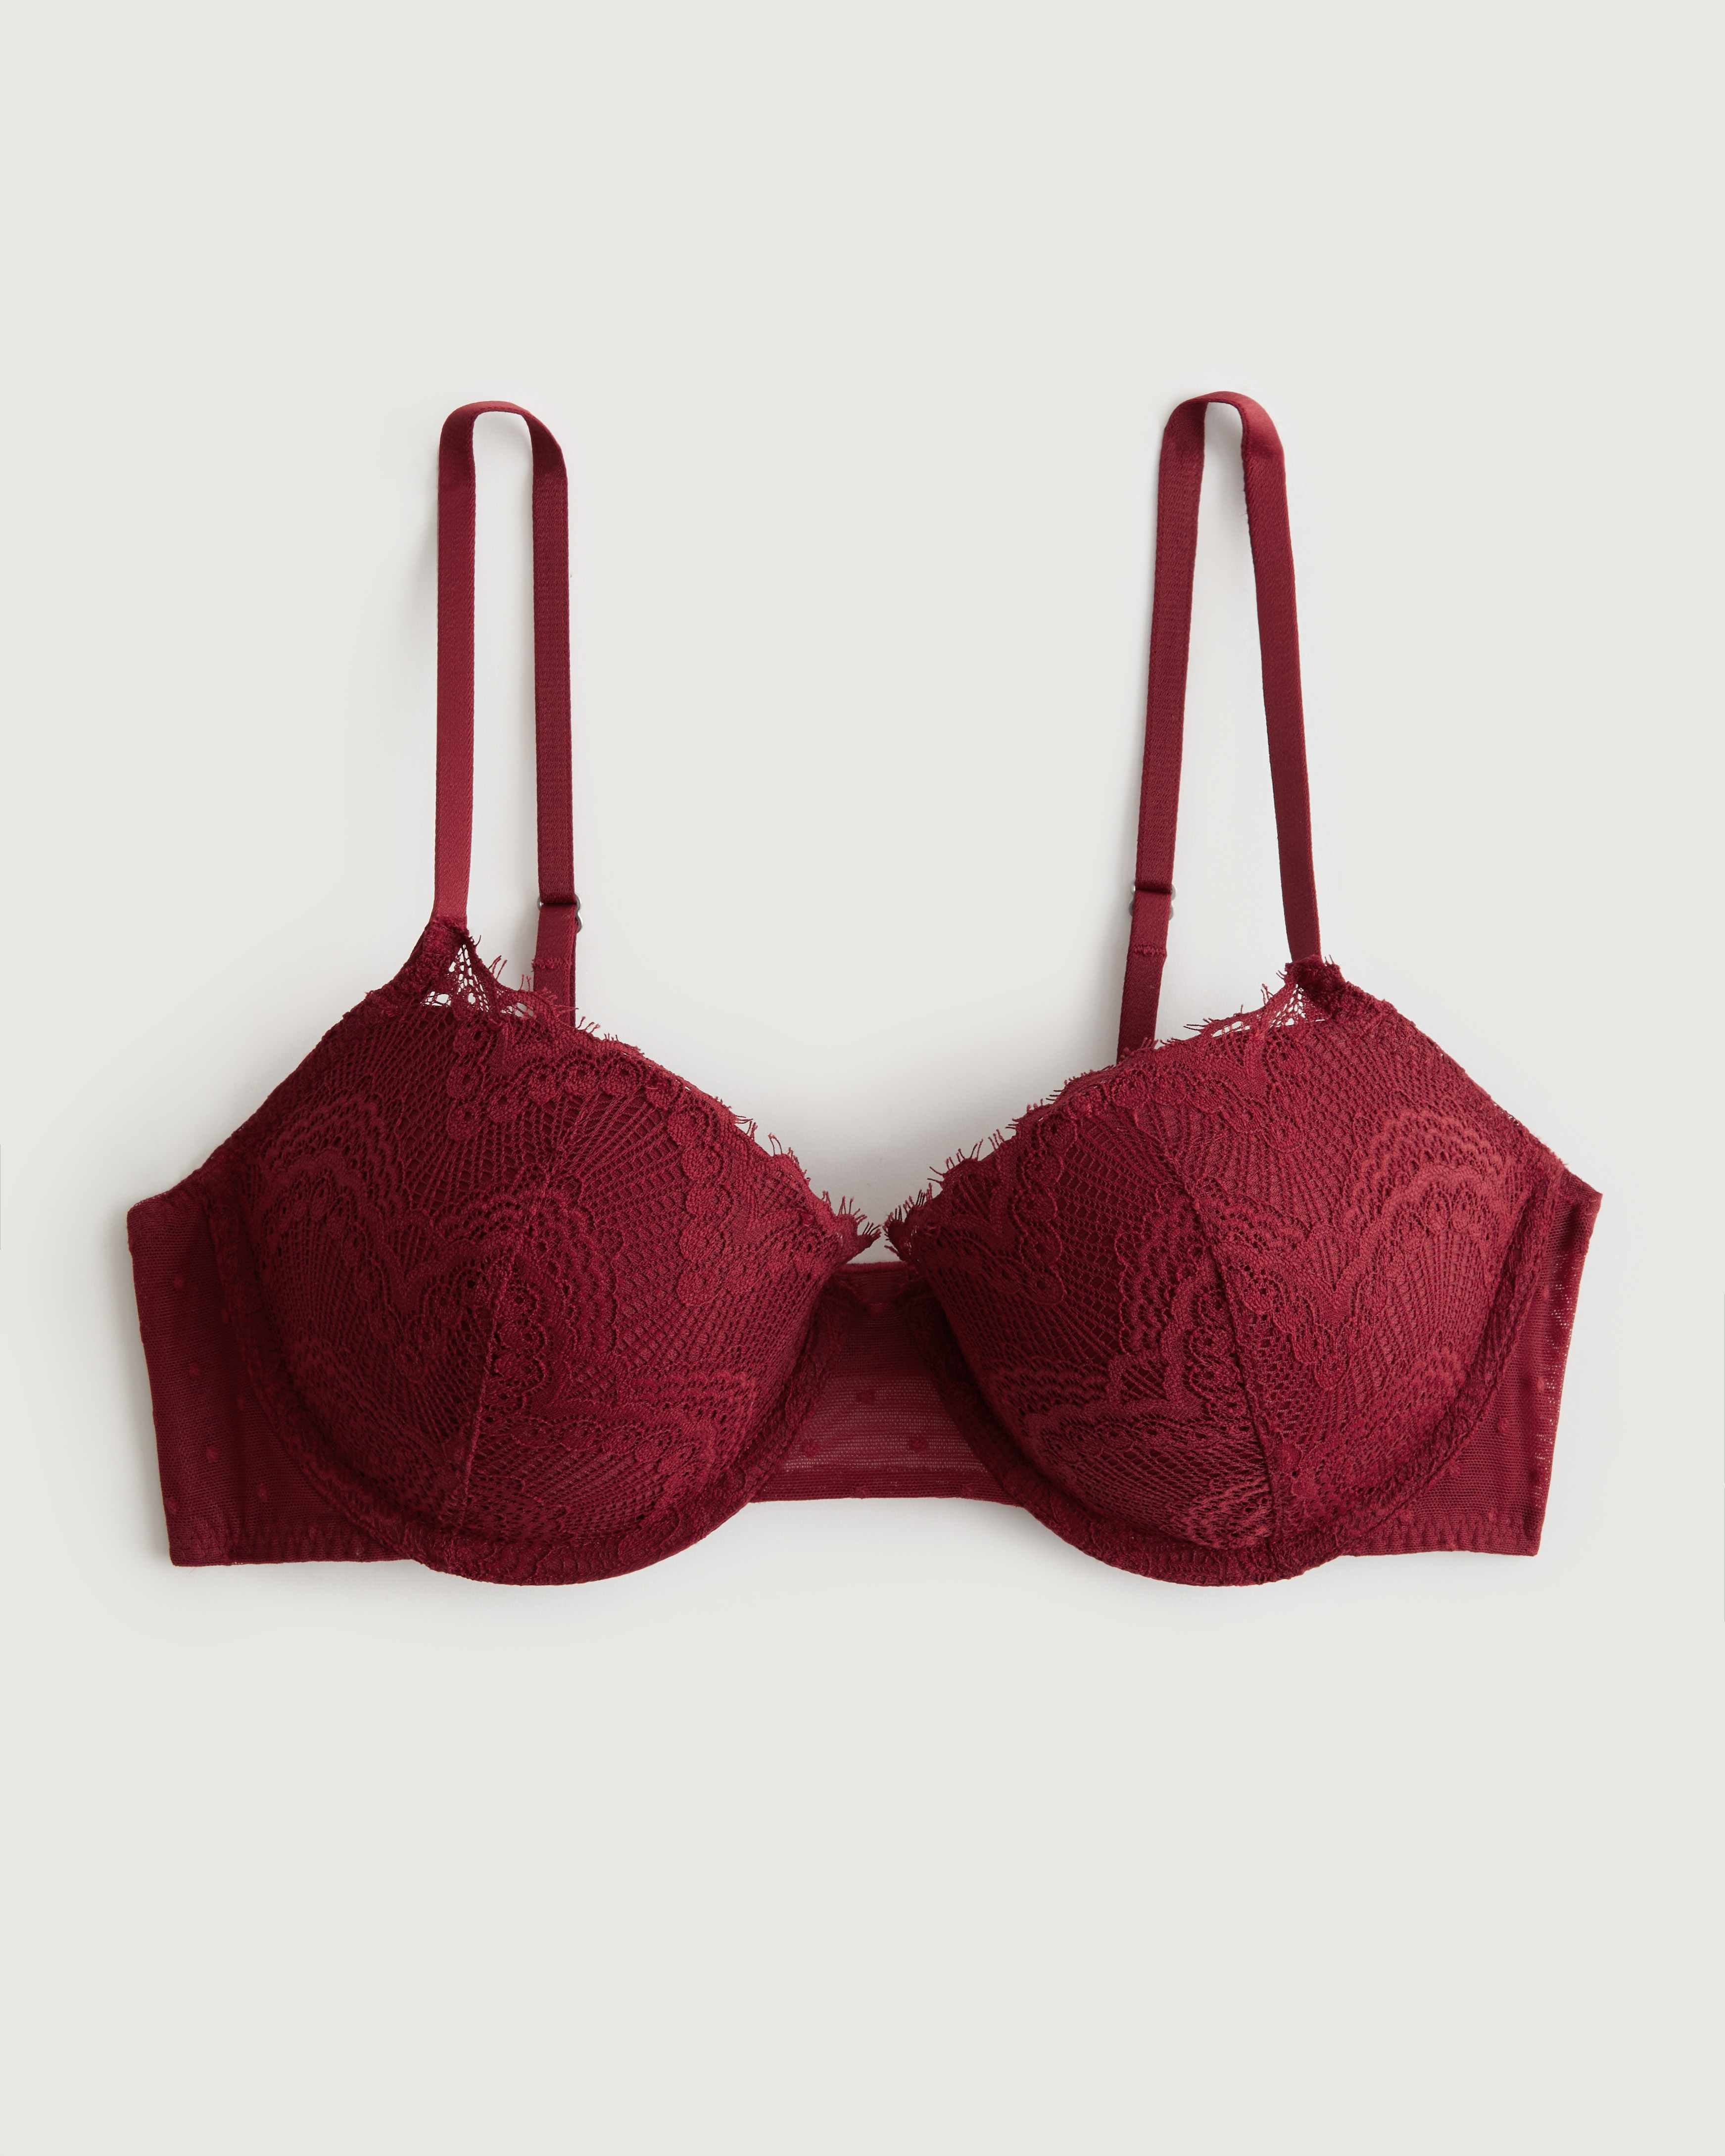 Hollister Gilly Hicks Lace Push-Up Balconette Bra